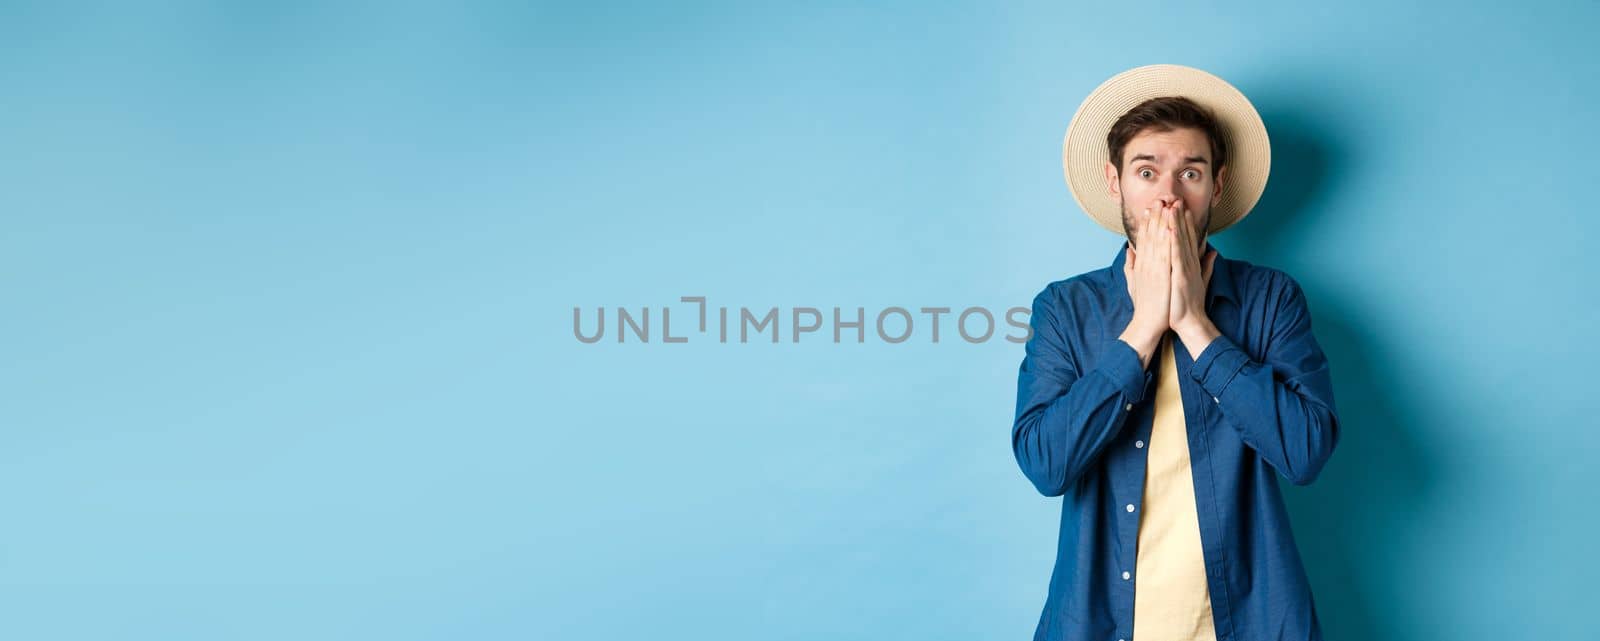 Shocked and alarmed tourist gasping, covering mouth with hands and looking startled at camera, standing on blue background by Benzoix